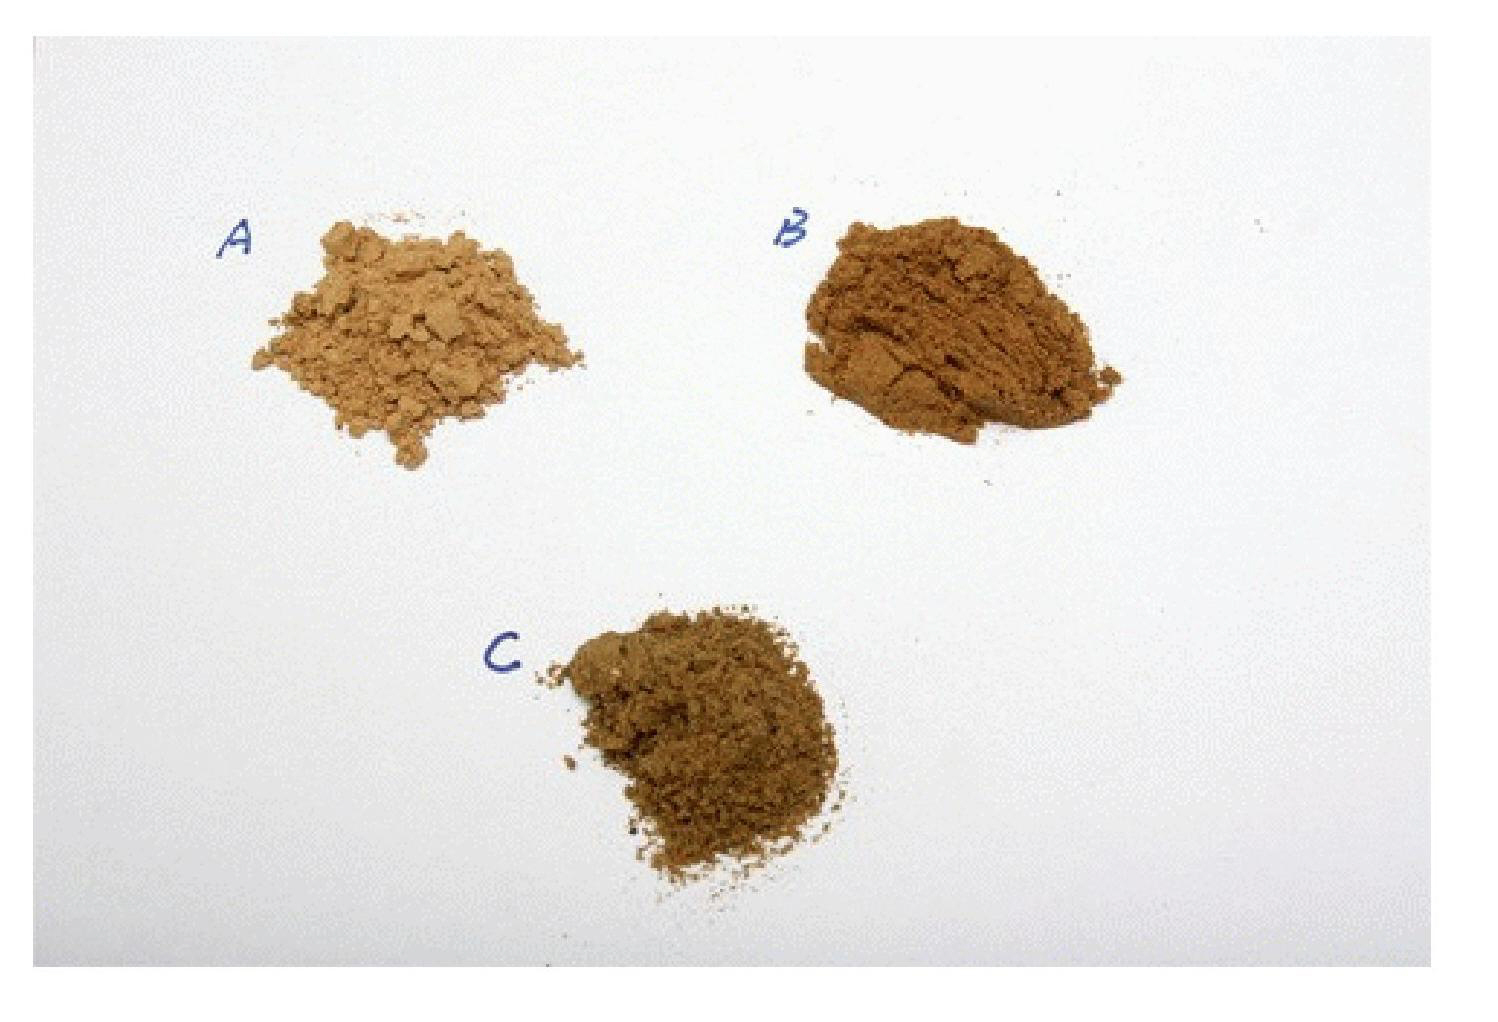 Process for de-coloring feather/feather meal degradation product and application of de-colored product